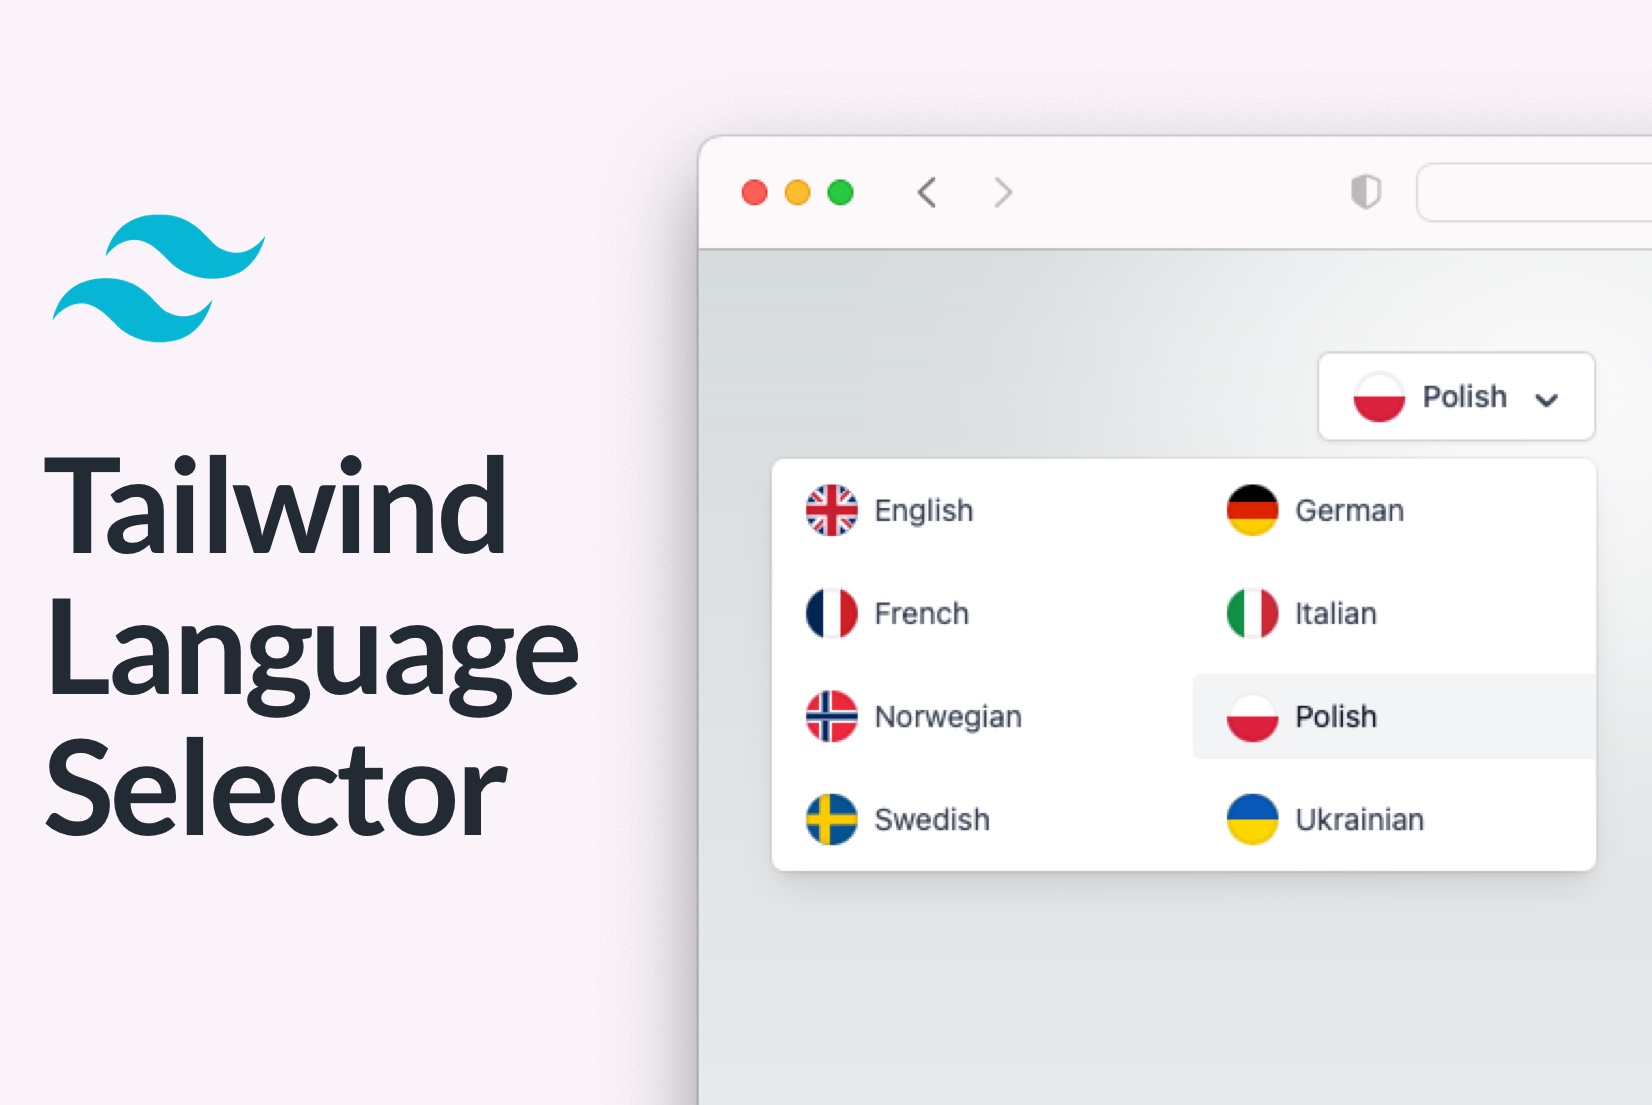 How to create a language selector with Tailwind CSS